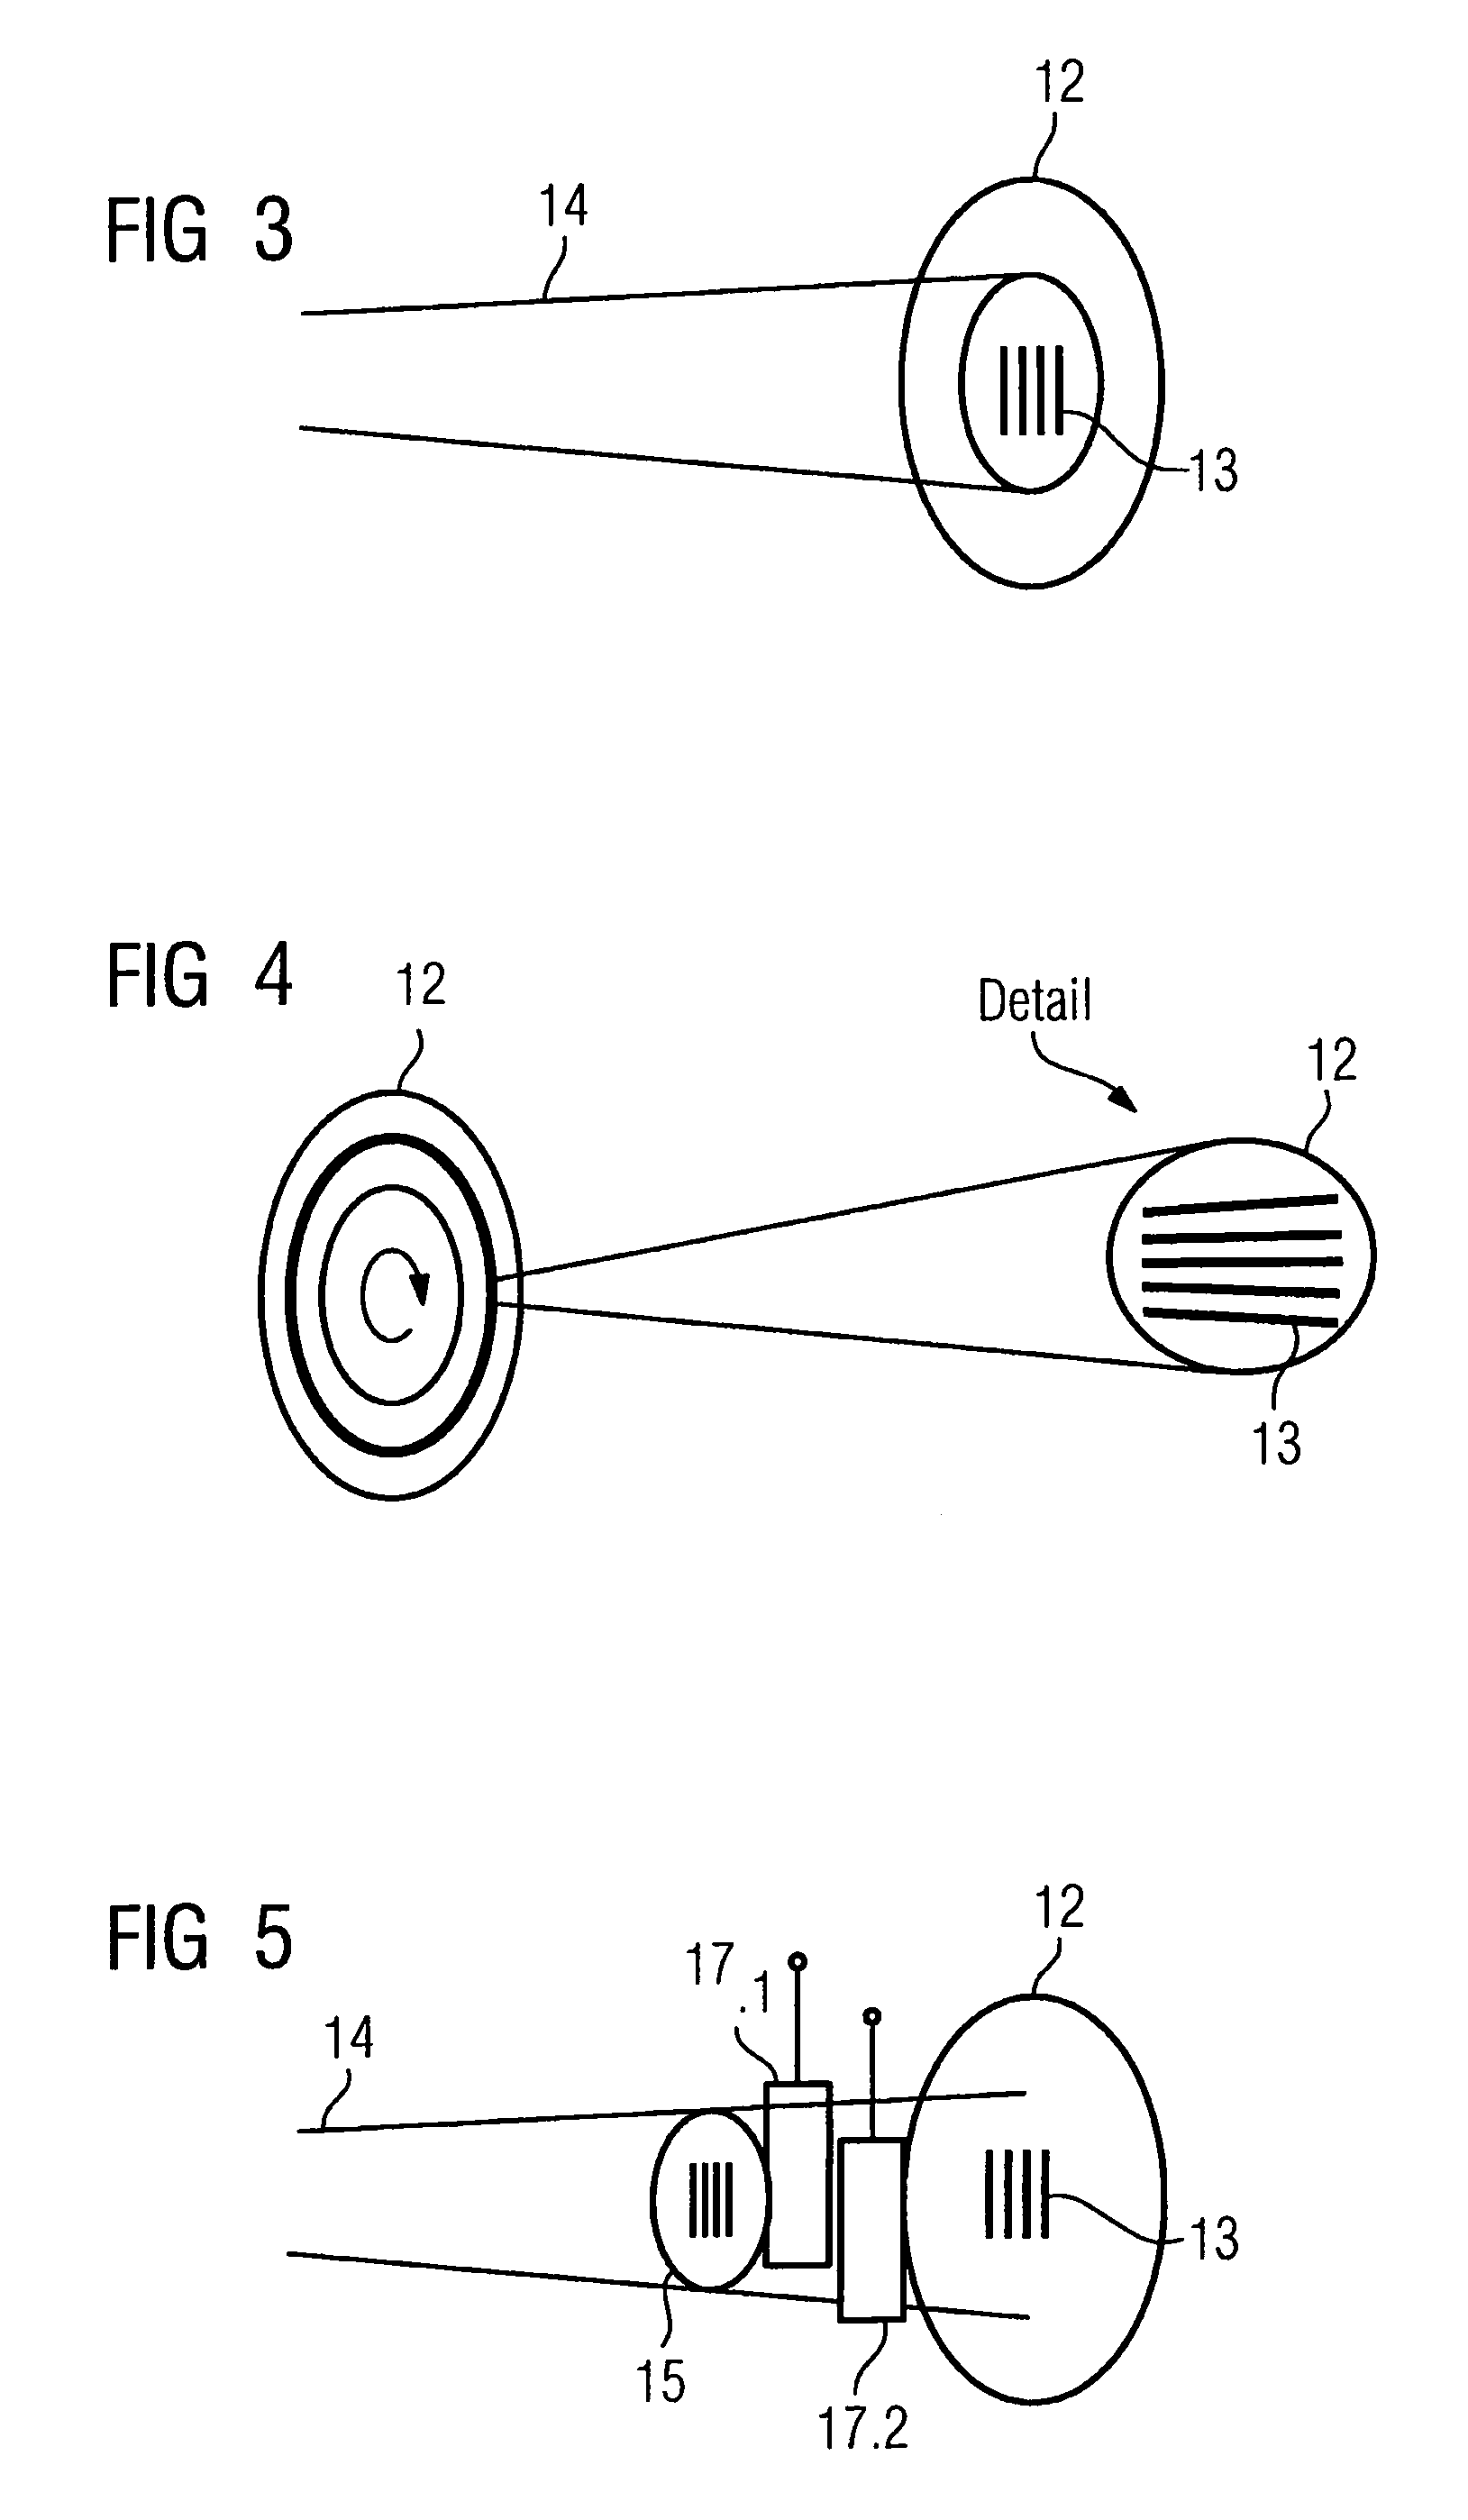 Focus detector arrangement and method for generating contrast x-ray images